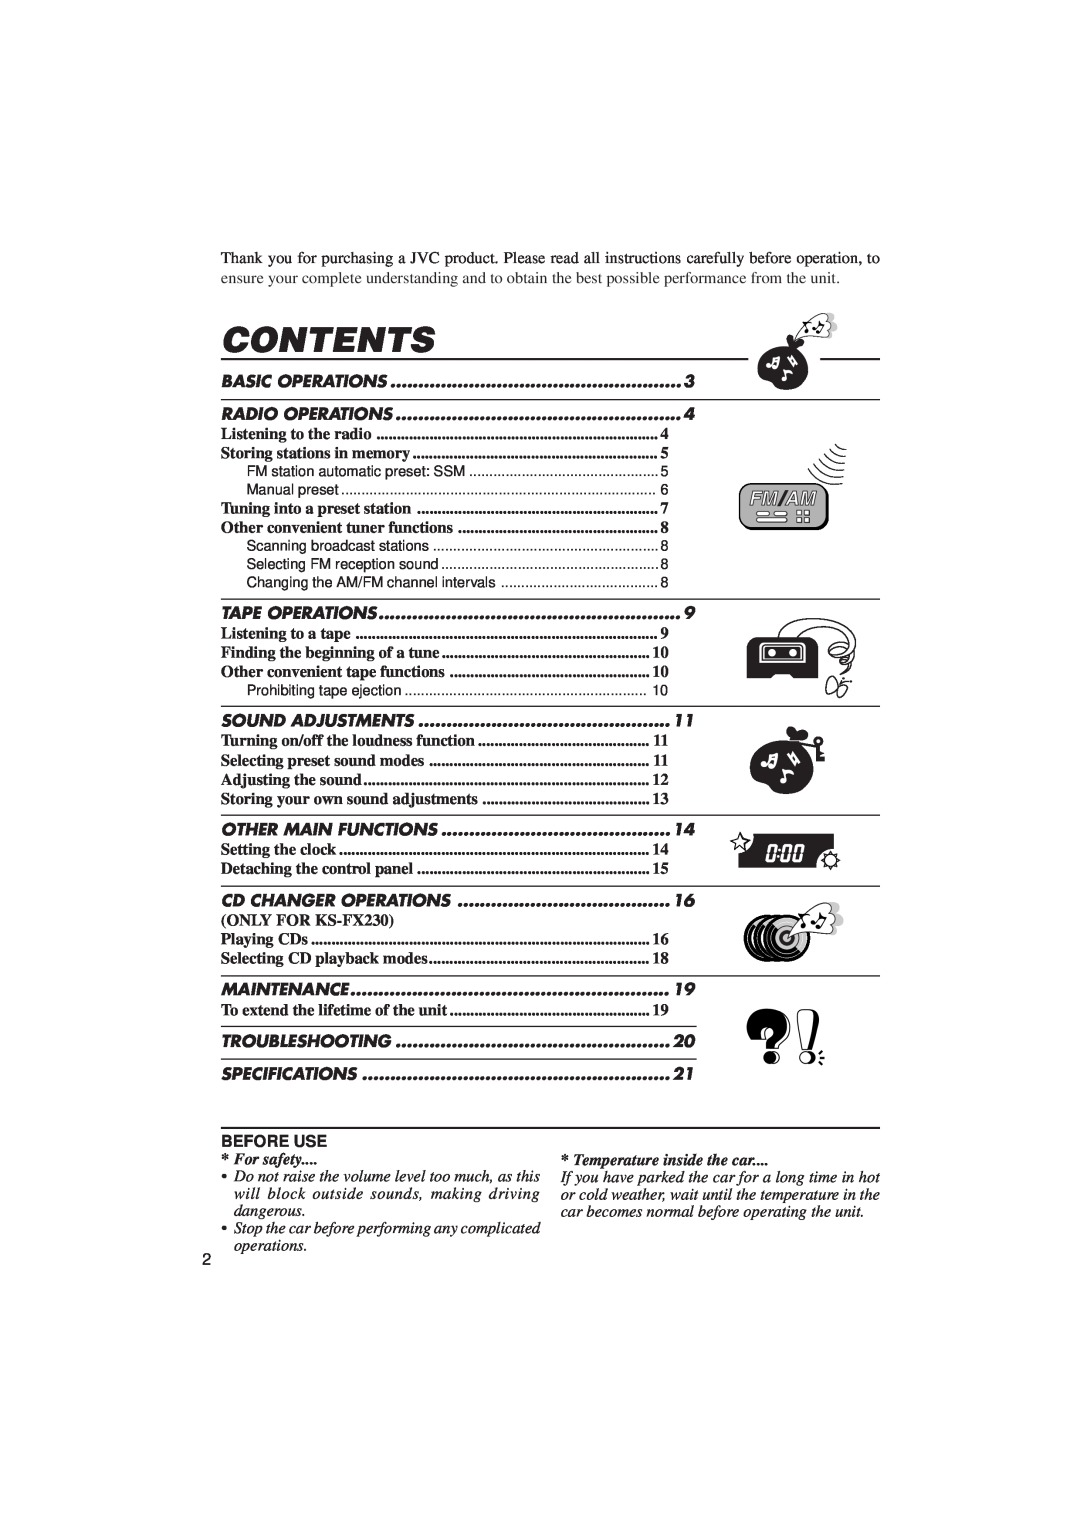 JVC F130 manual Contents, ONLY FOR KS-FX230, Before Use, For safety, Temperature inside the car 